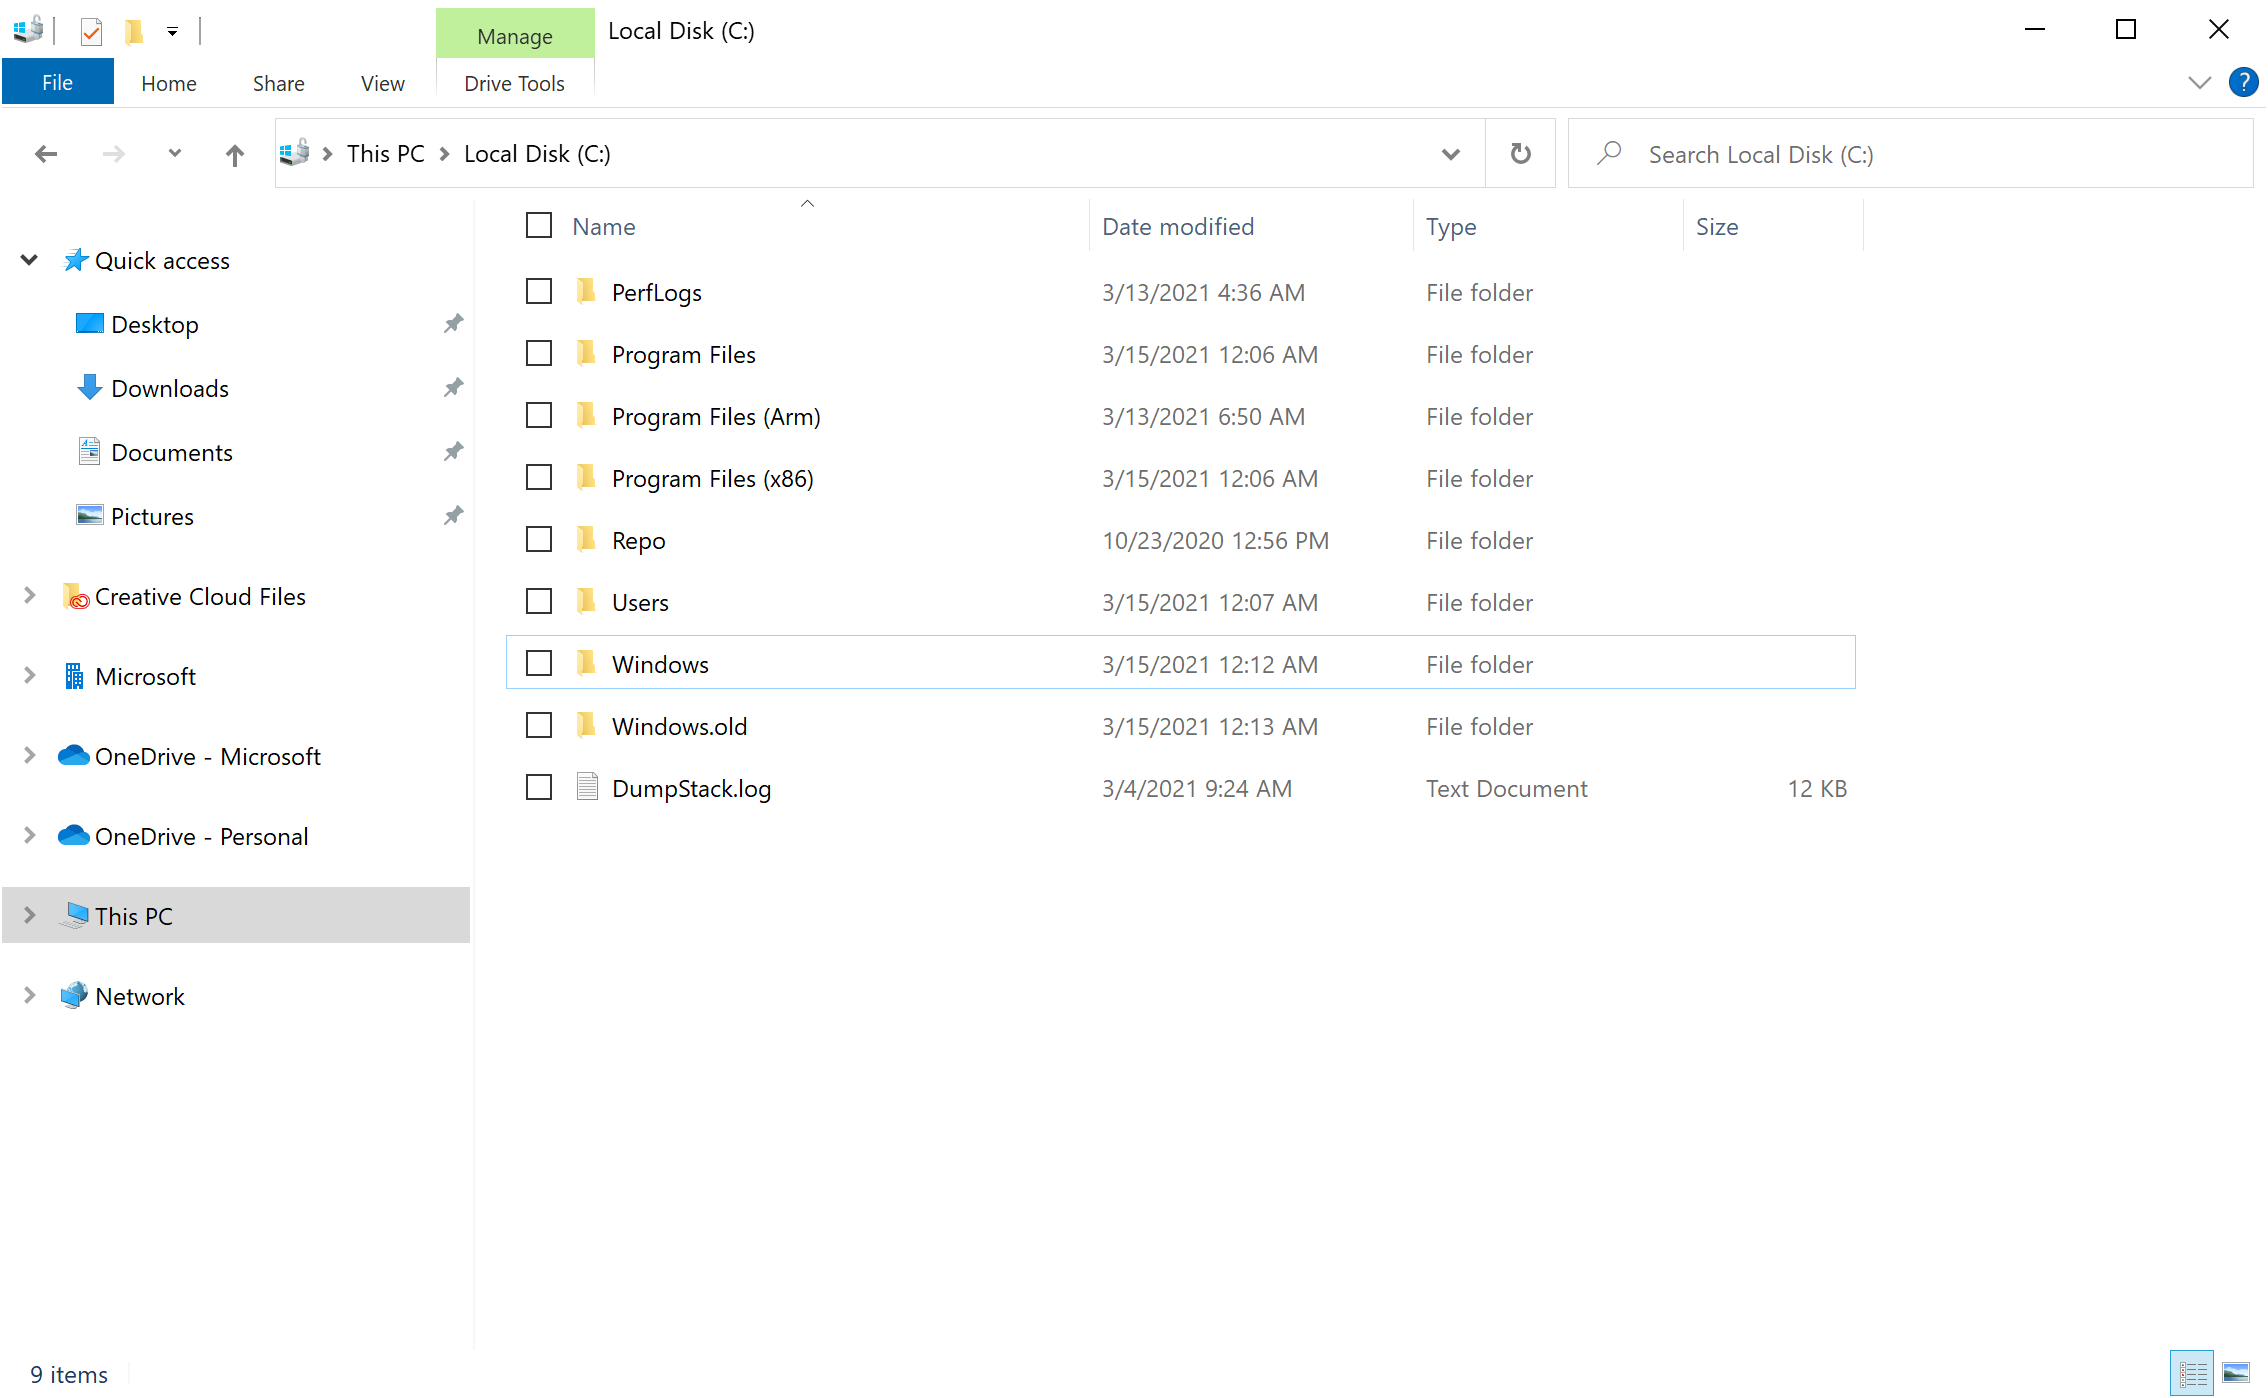 Updated Layout of File Explorer